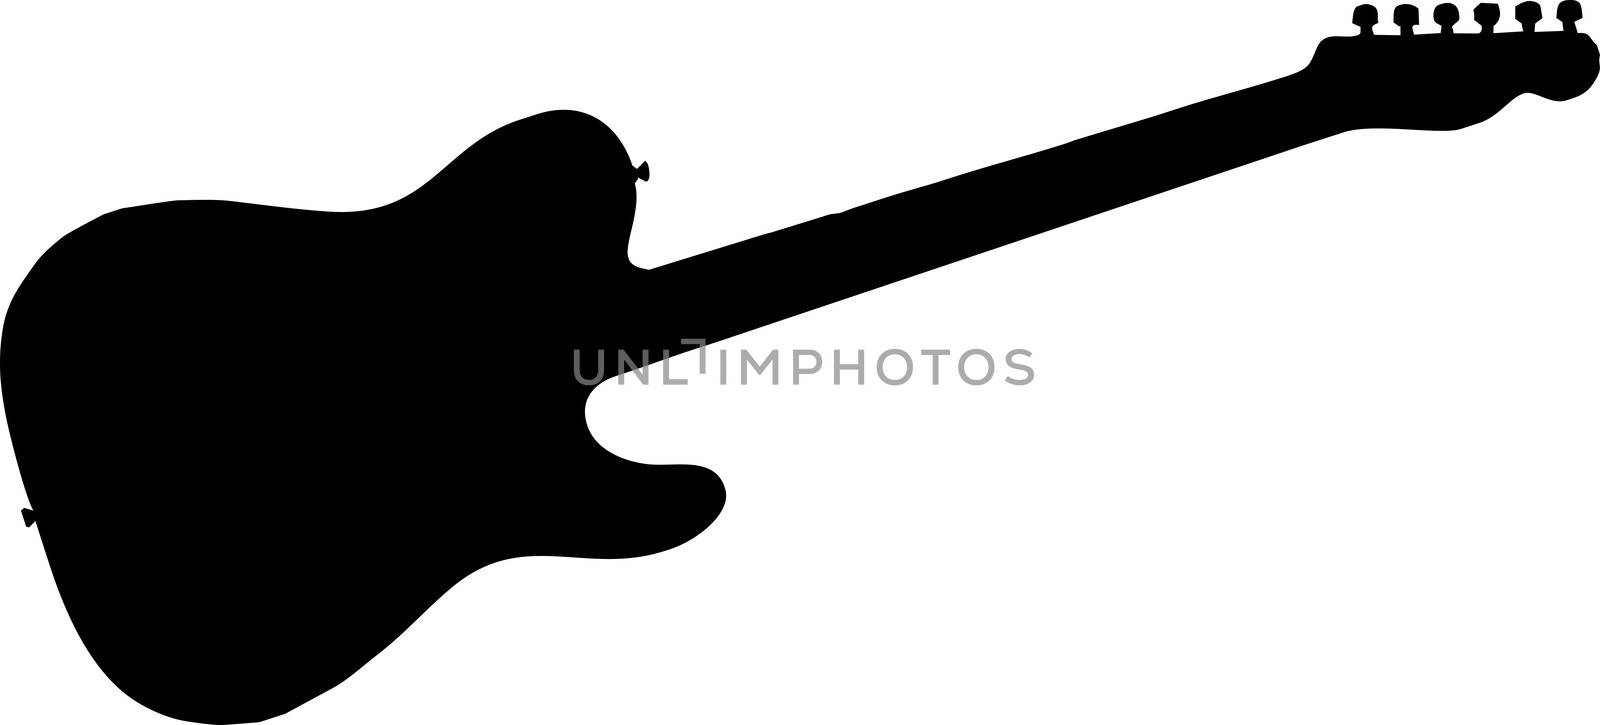 electric guitar silhouette by paolo77